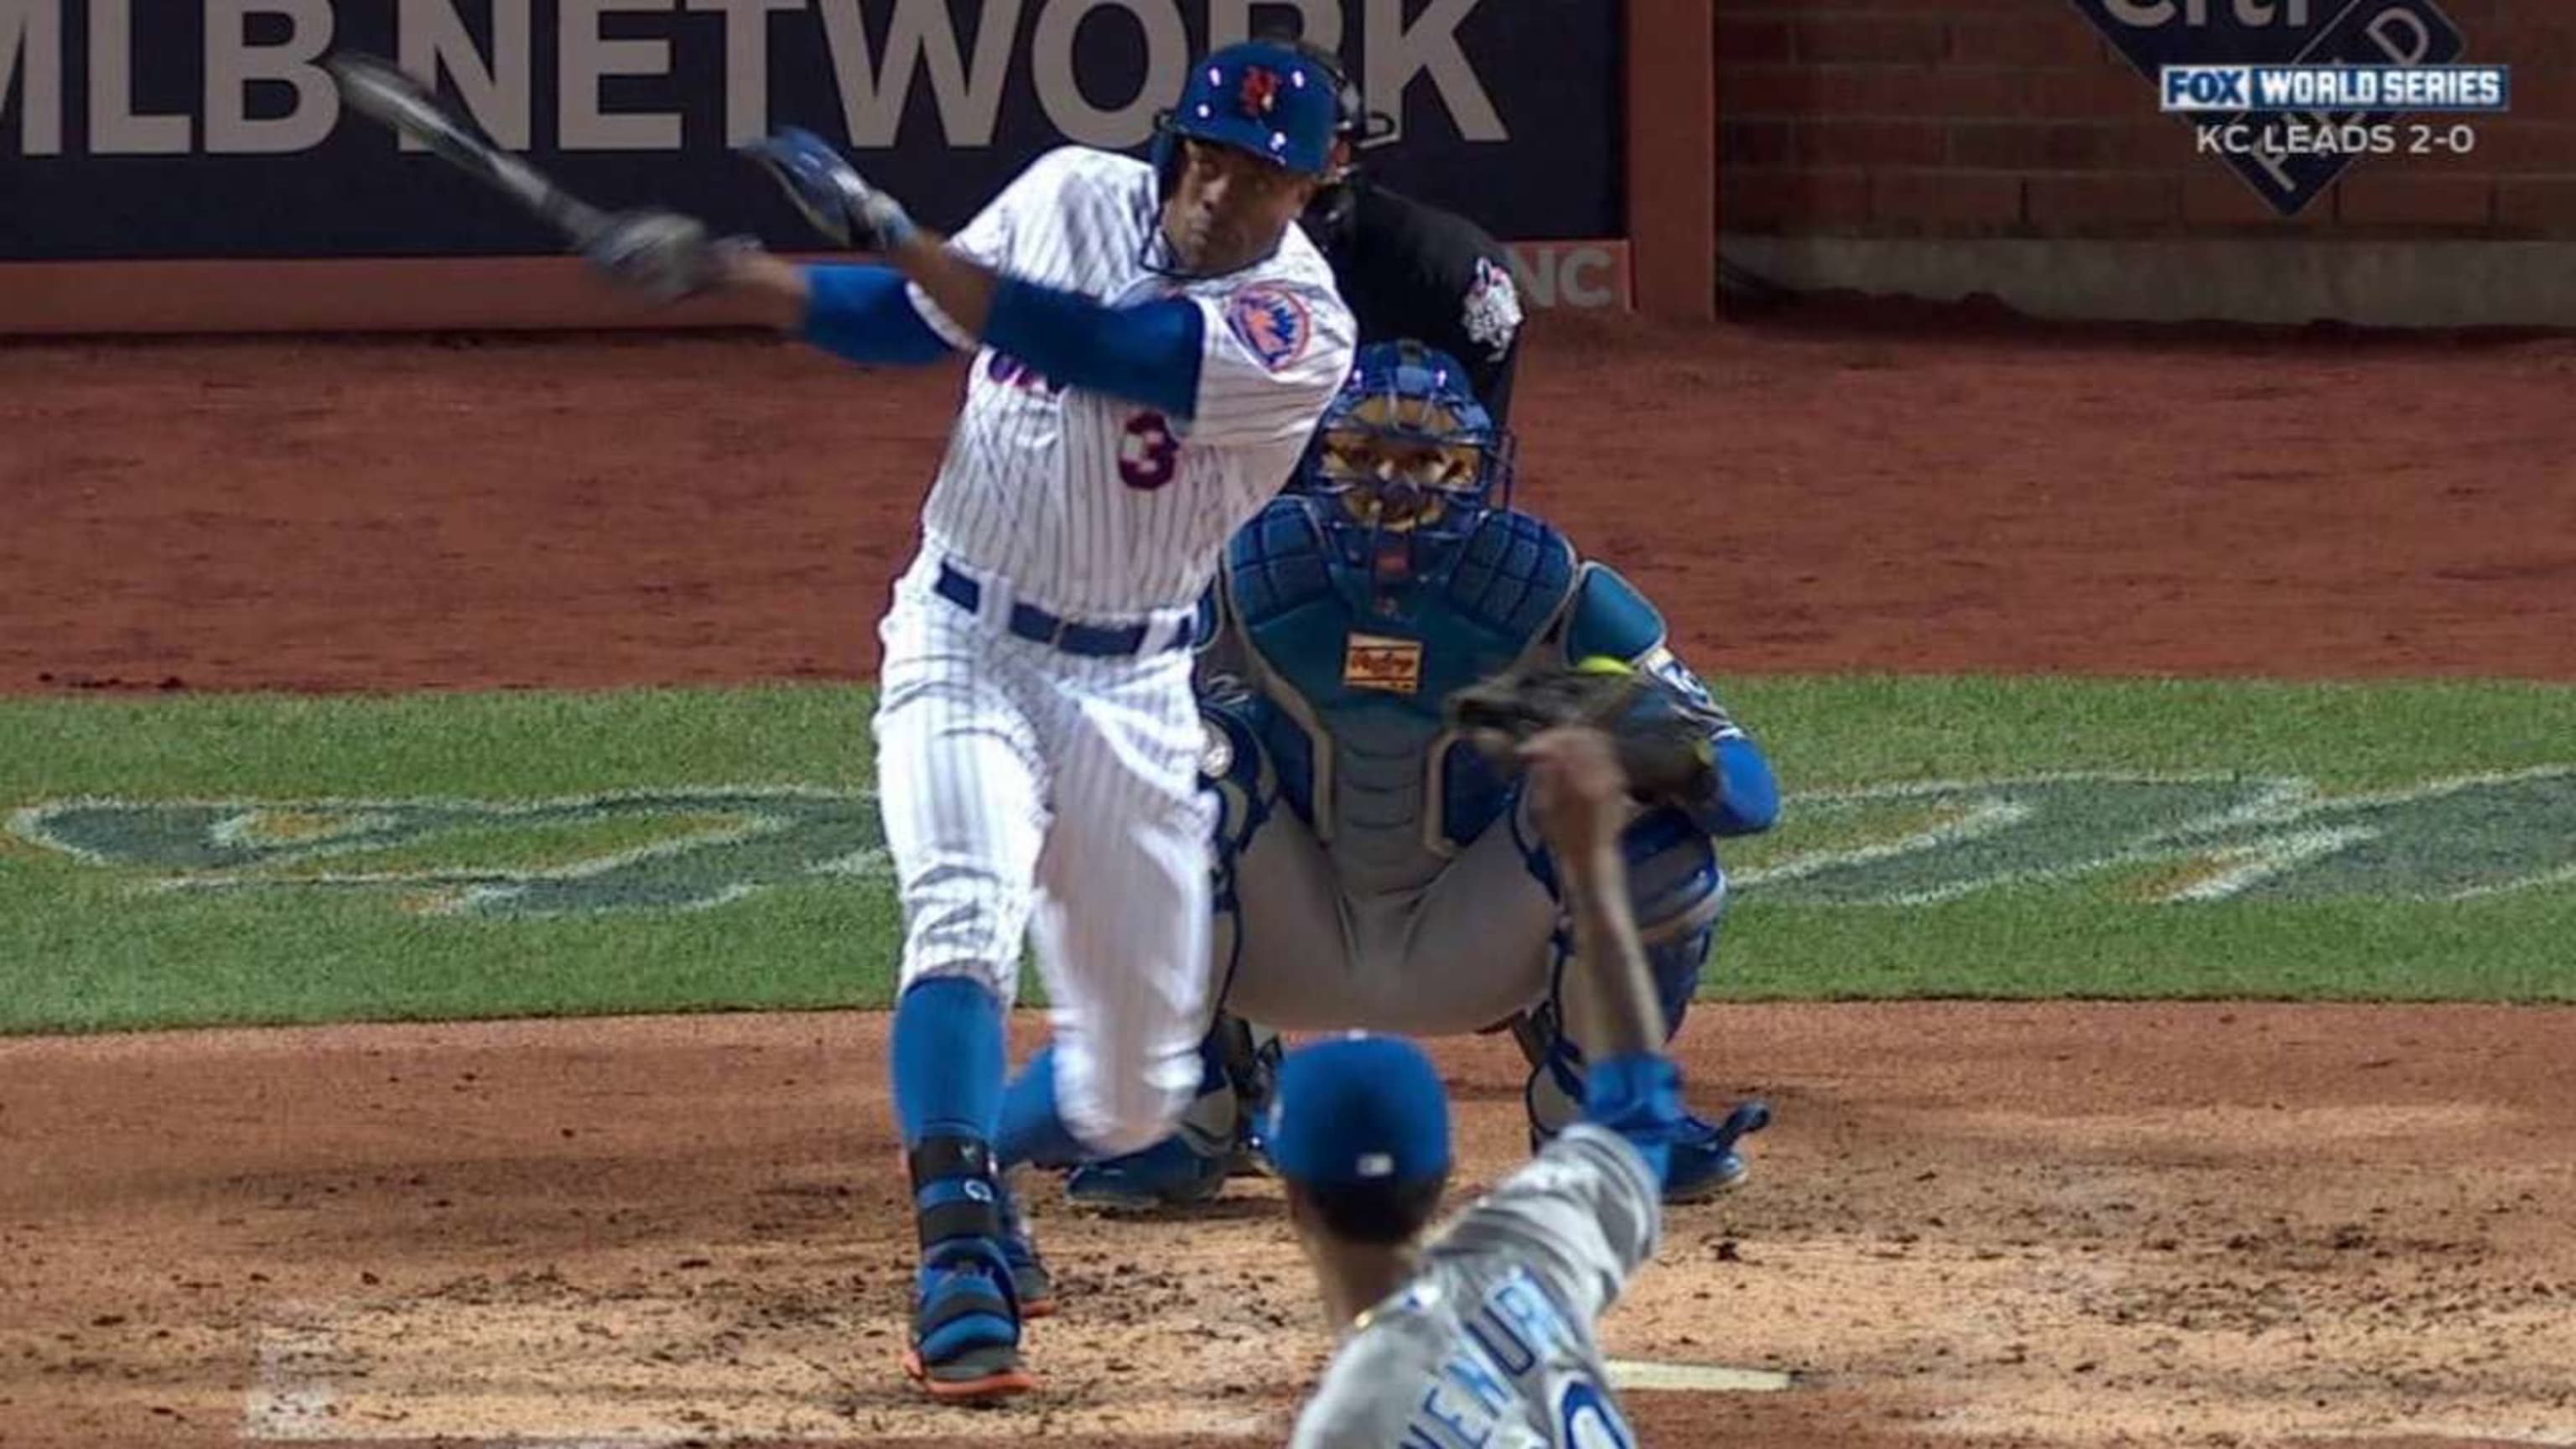 David Wright leads Mets in Game 3 World Series